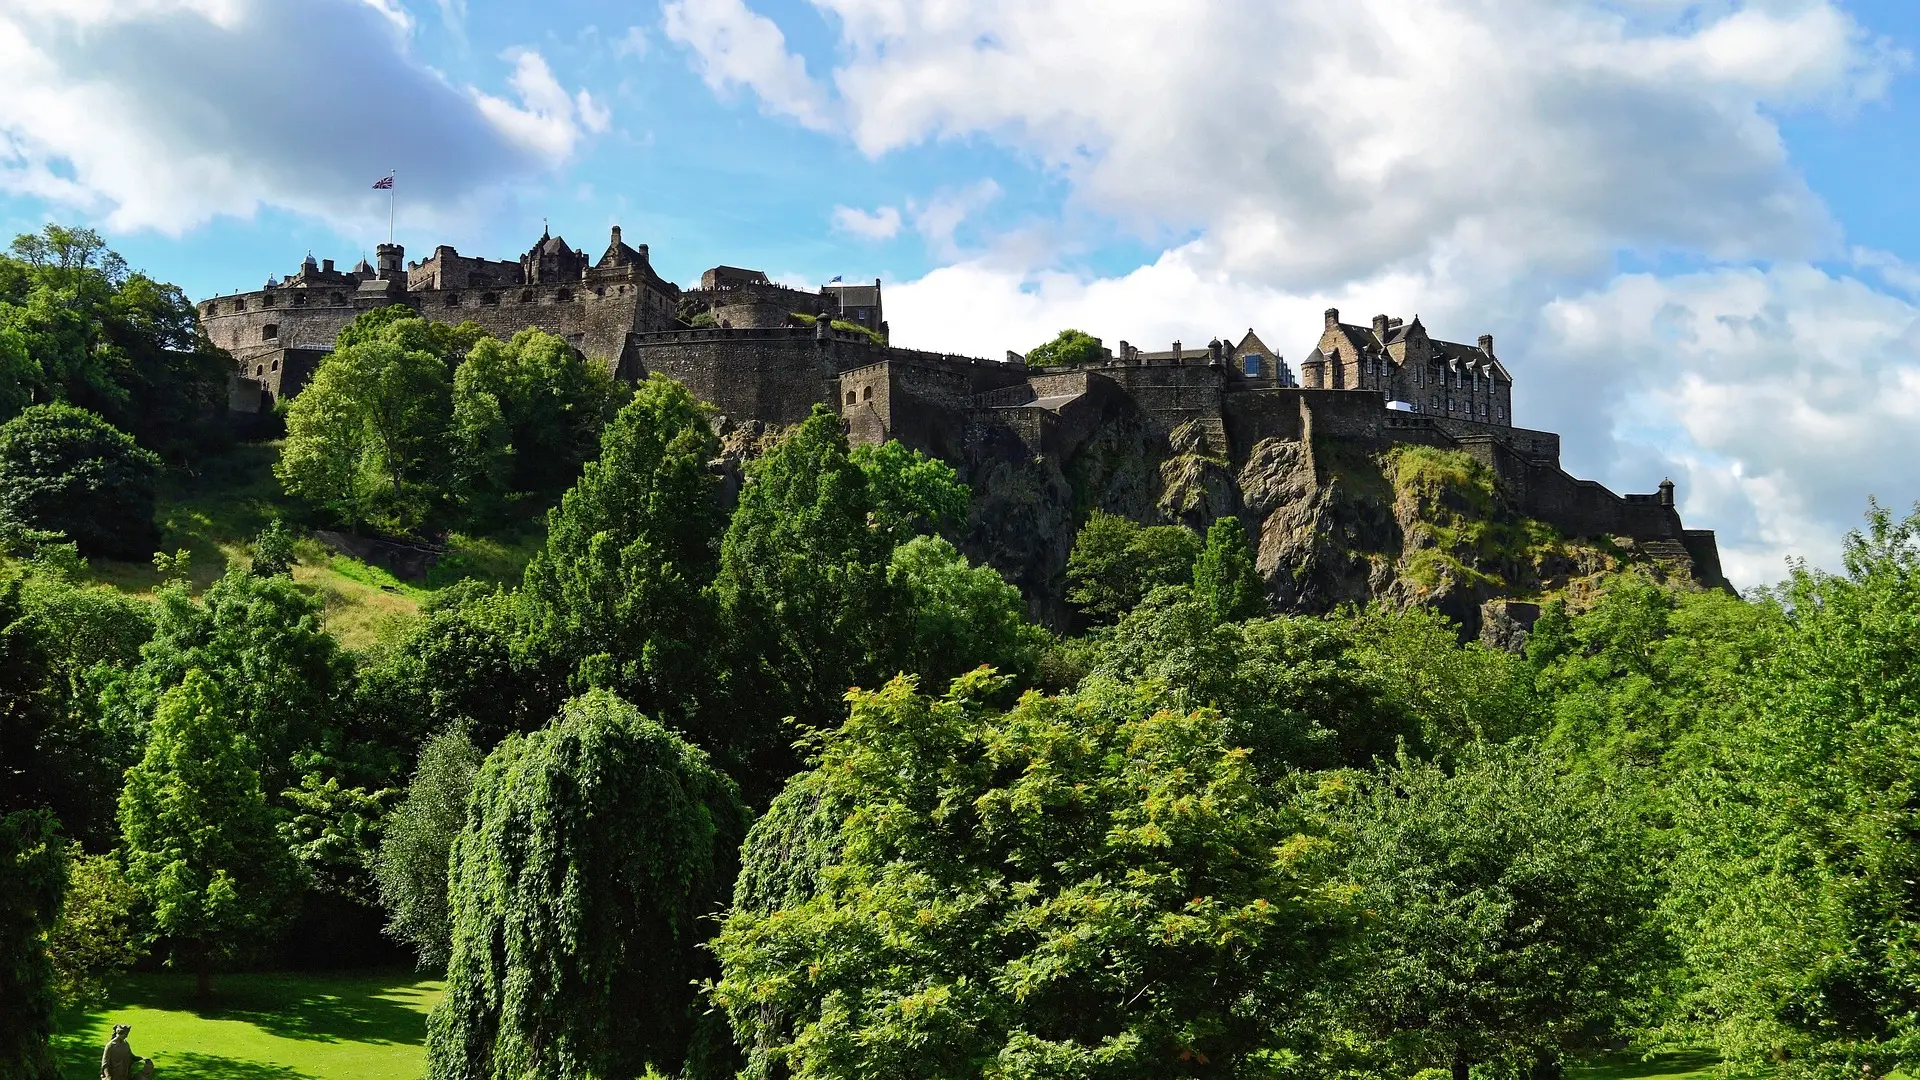 Green forest and at the top a massive black stone castle with a massive and tall battlements in Edinburgh, Scottand.